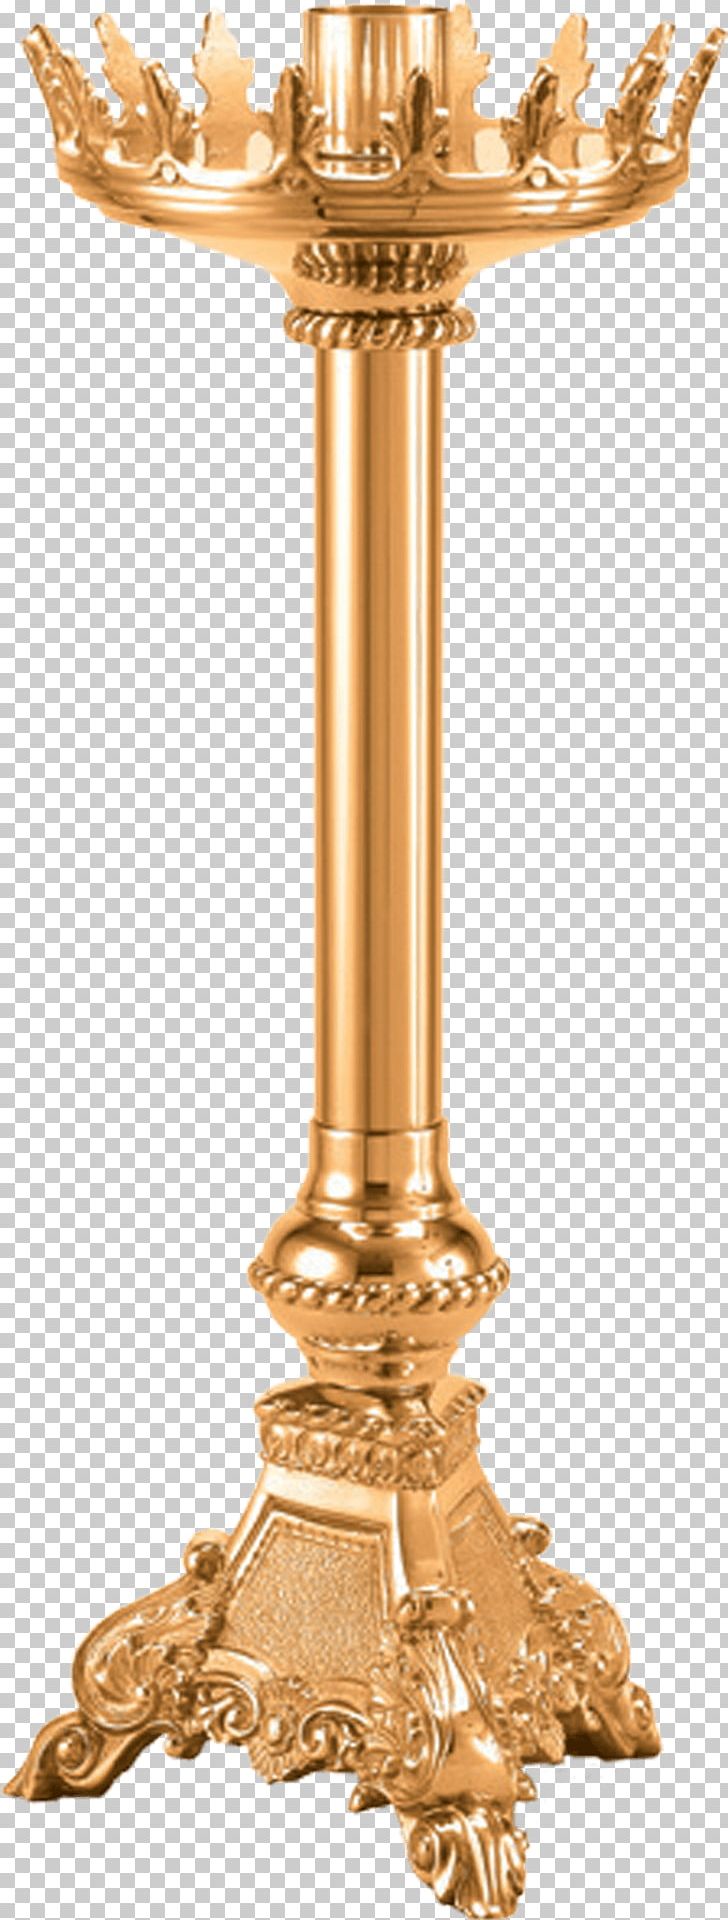 01504 Altar Candlestick Religion Inch PNG, Clipart, 01504, Altar, Altar Candlestick, Artifact, Brass Free PNG Download